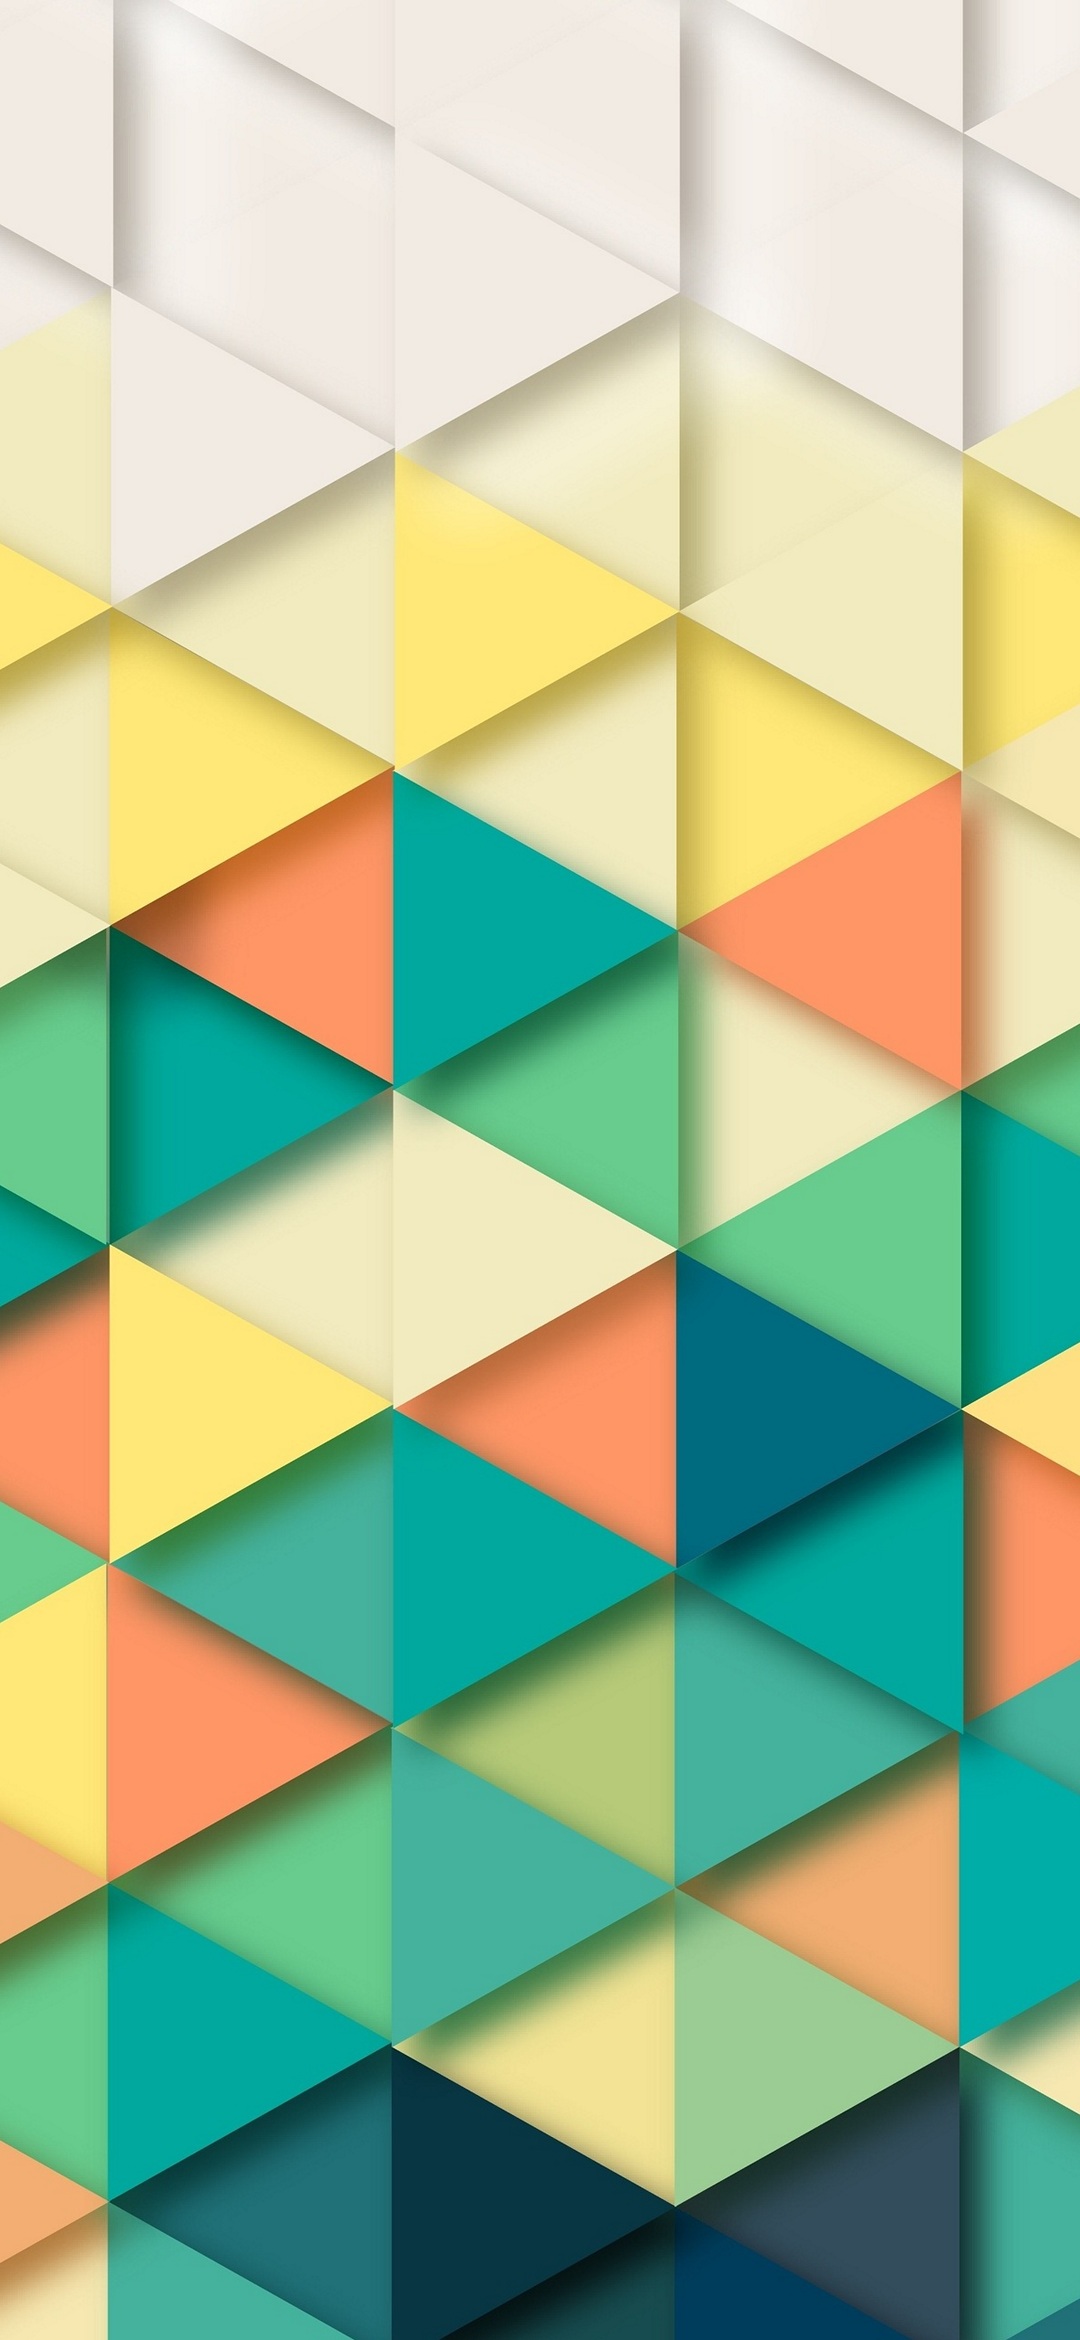 A collection of colorful triangles with shadows ZenFone 6 Android 壁紙・待ち受け